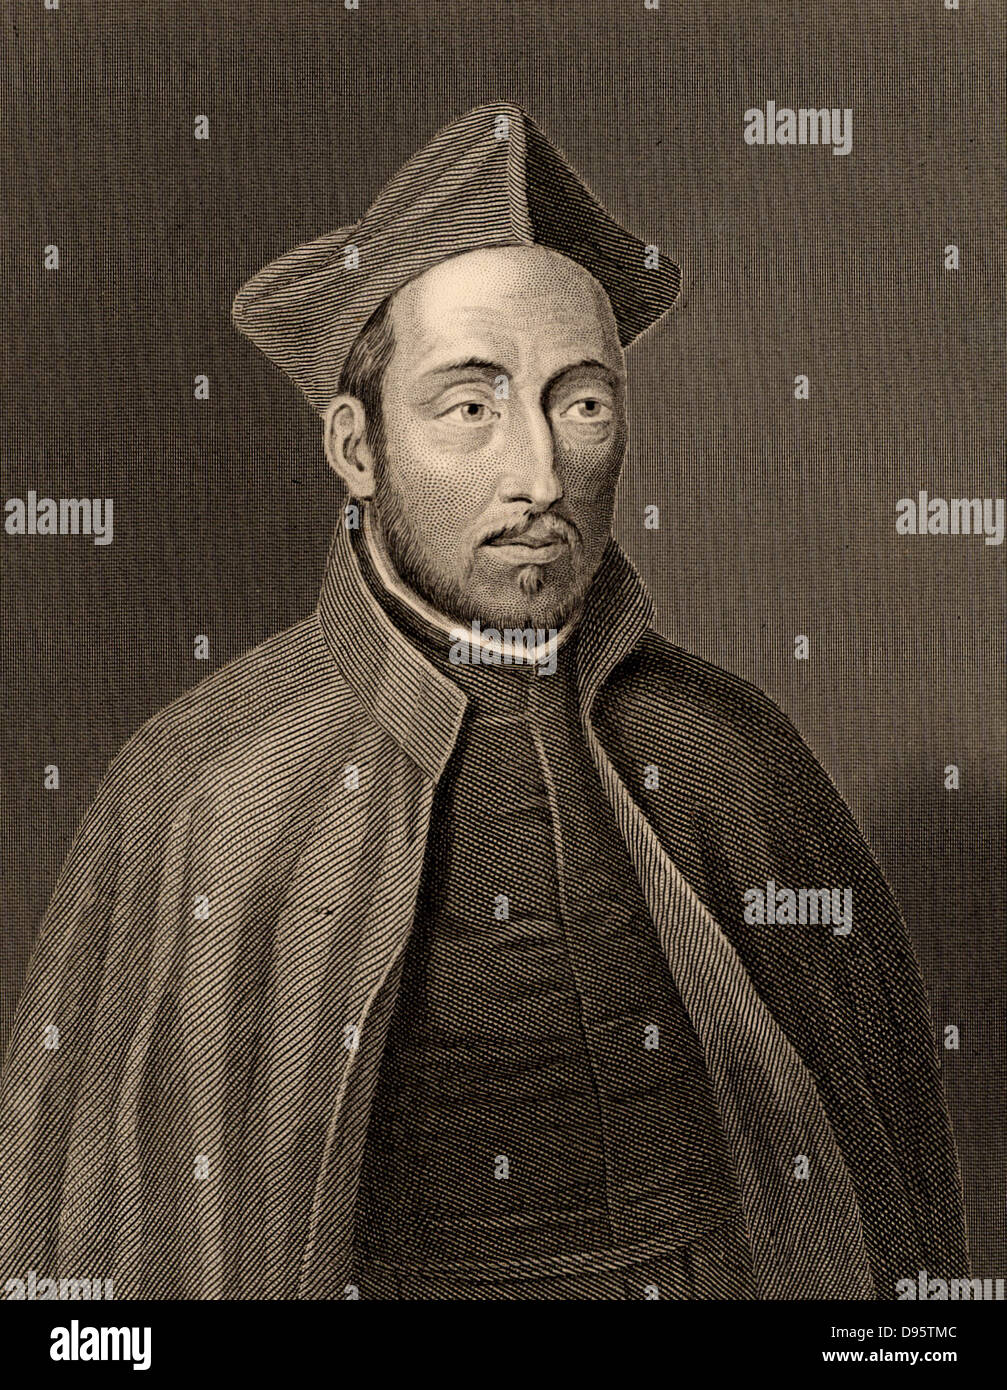 Ignatius Loyola, born Inigo Lopez de Recalde (1491-1556) Spanish soldier and, with St Francis Xavier (1506-1552) in 1534, one of the founders of the Society of Jesus, the Jesuits.  Engraving from 'The Illustrated Globe Encyclopaedia of Universal Knowledge' Vol. V (London, 1882). Stock Photo